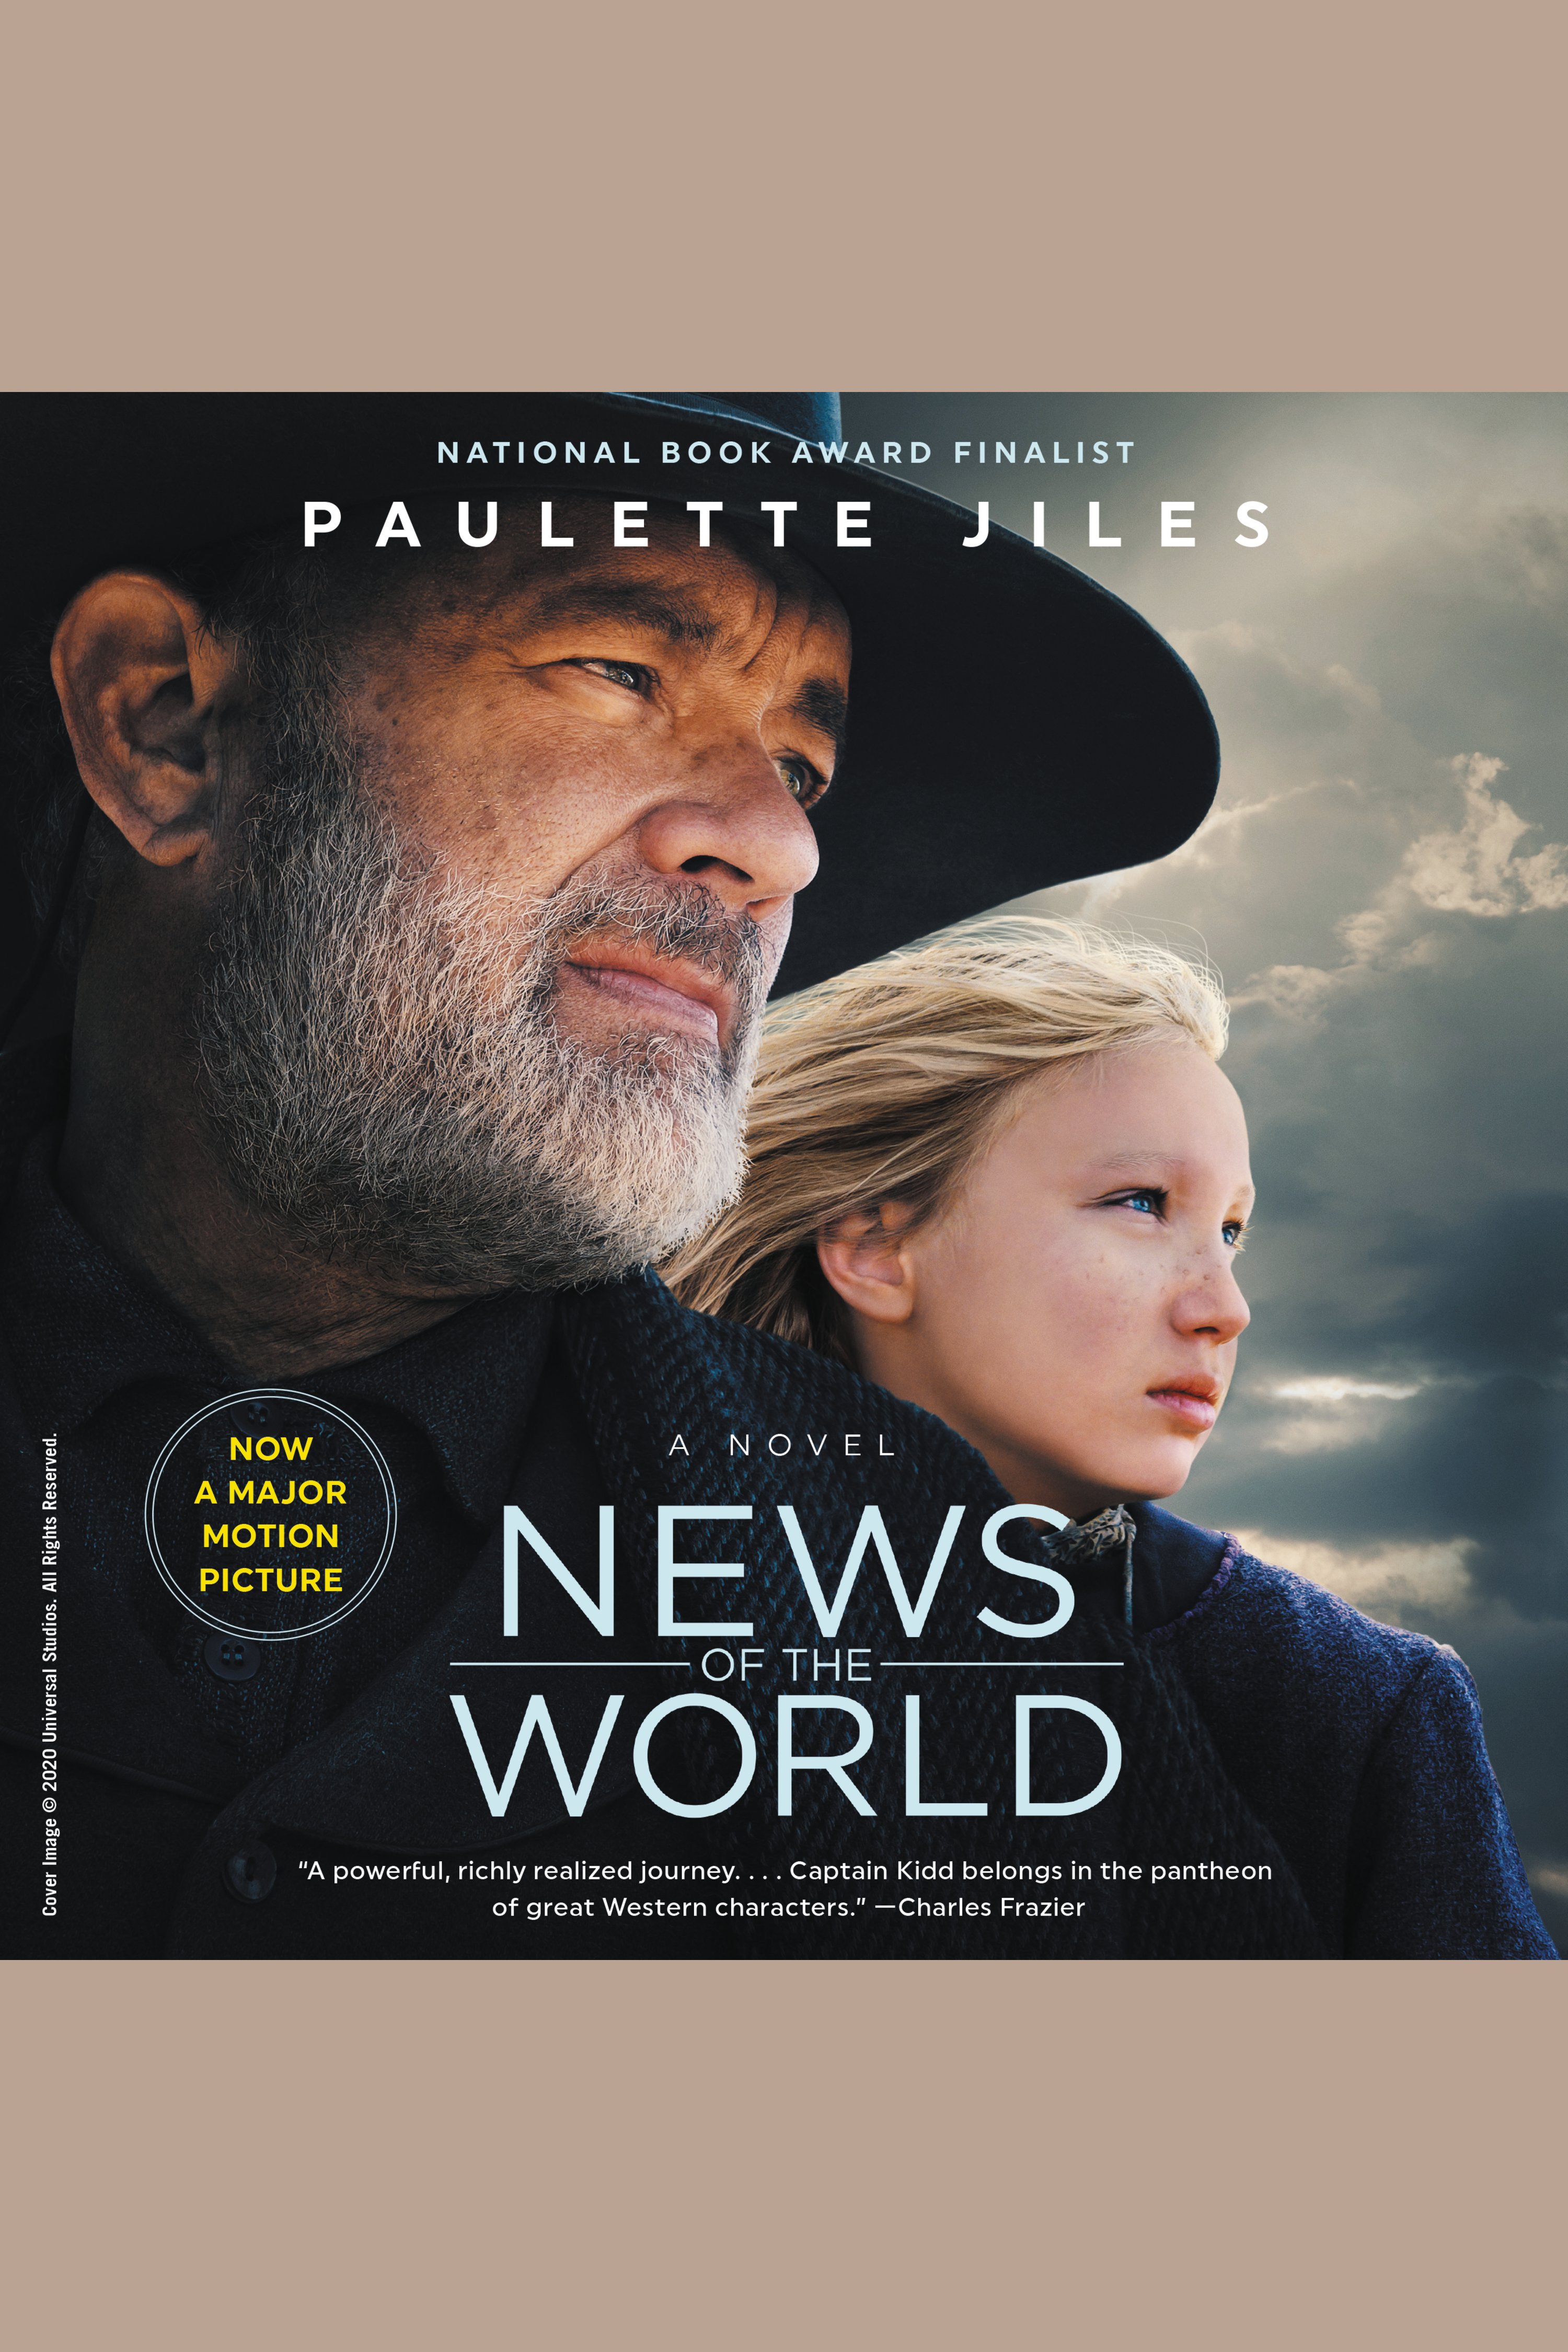 News of the World cover image